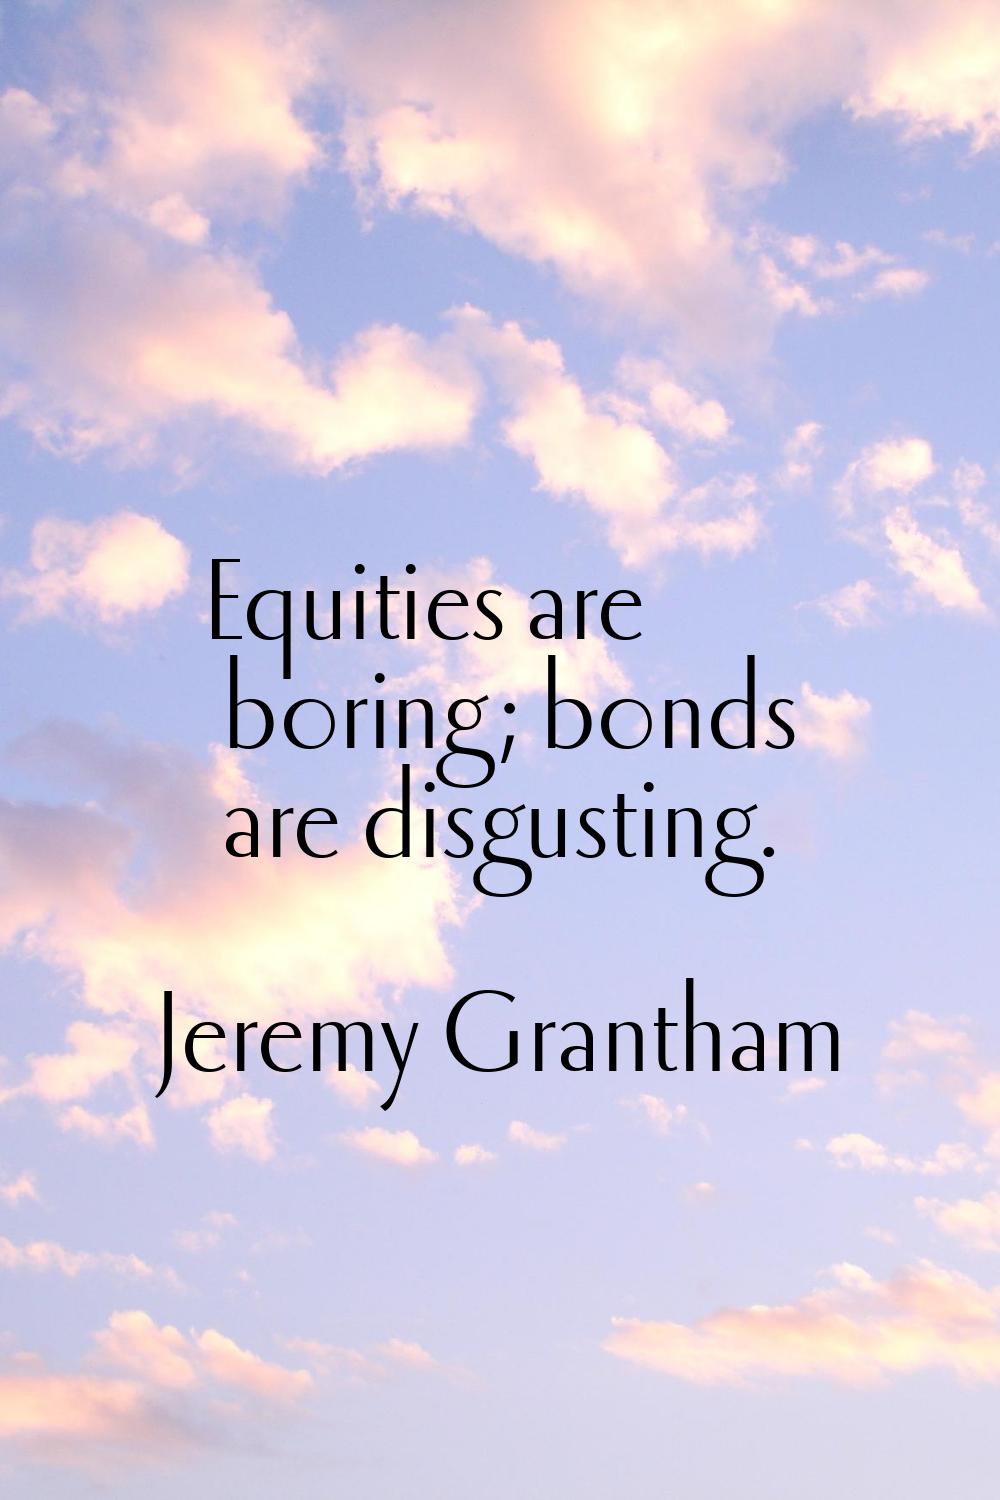 Equities are boring; bonds are disgusting.